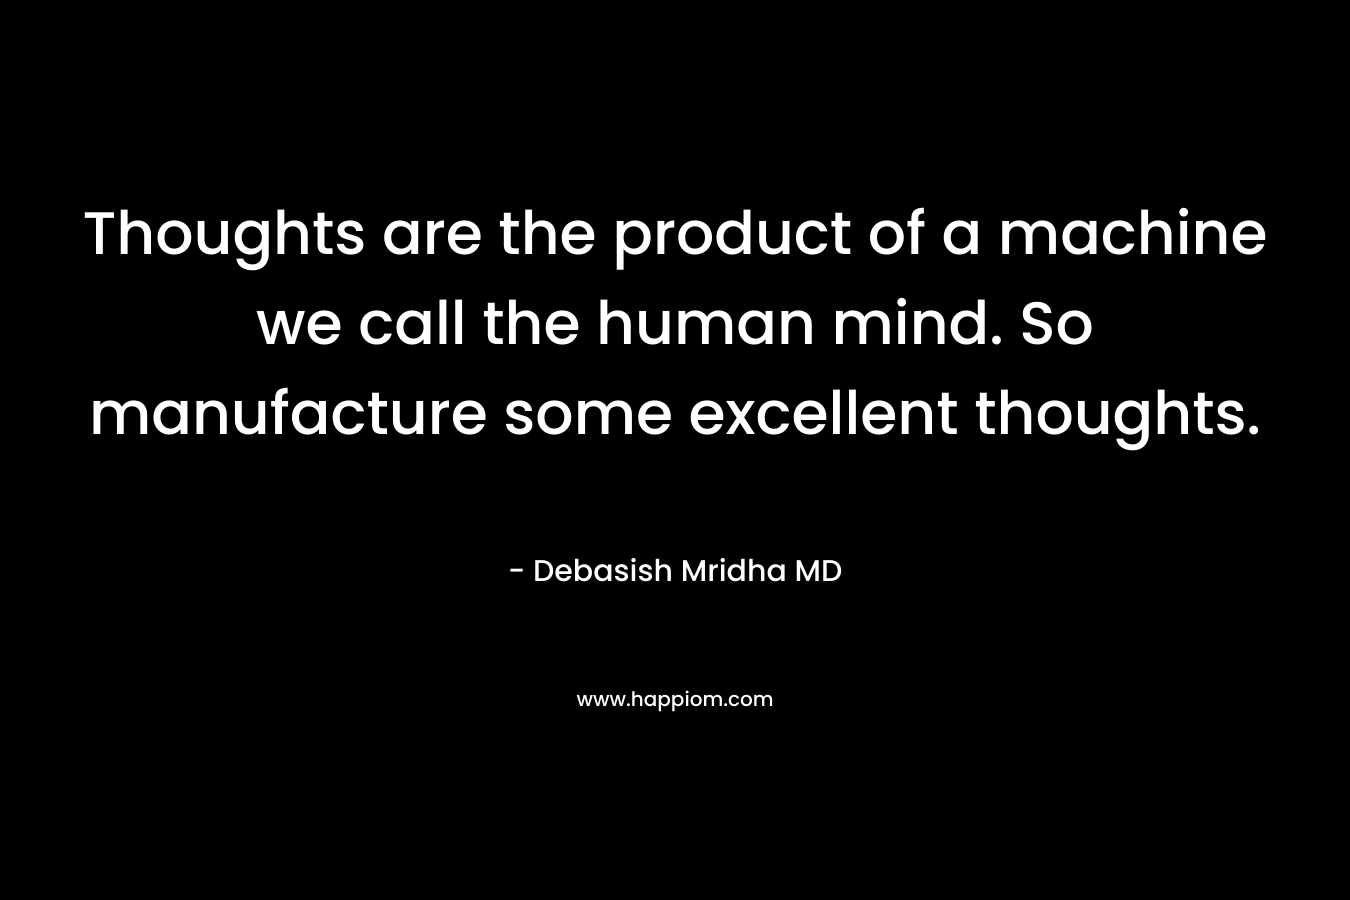 Thoughts are the product of a machine we call the human mind. So manufacture some excellent thoughts.